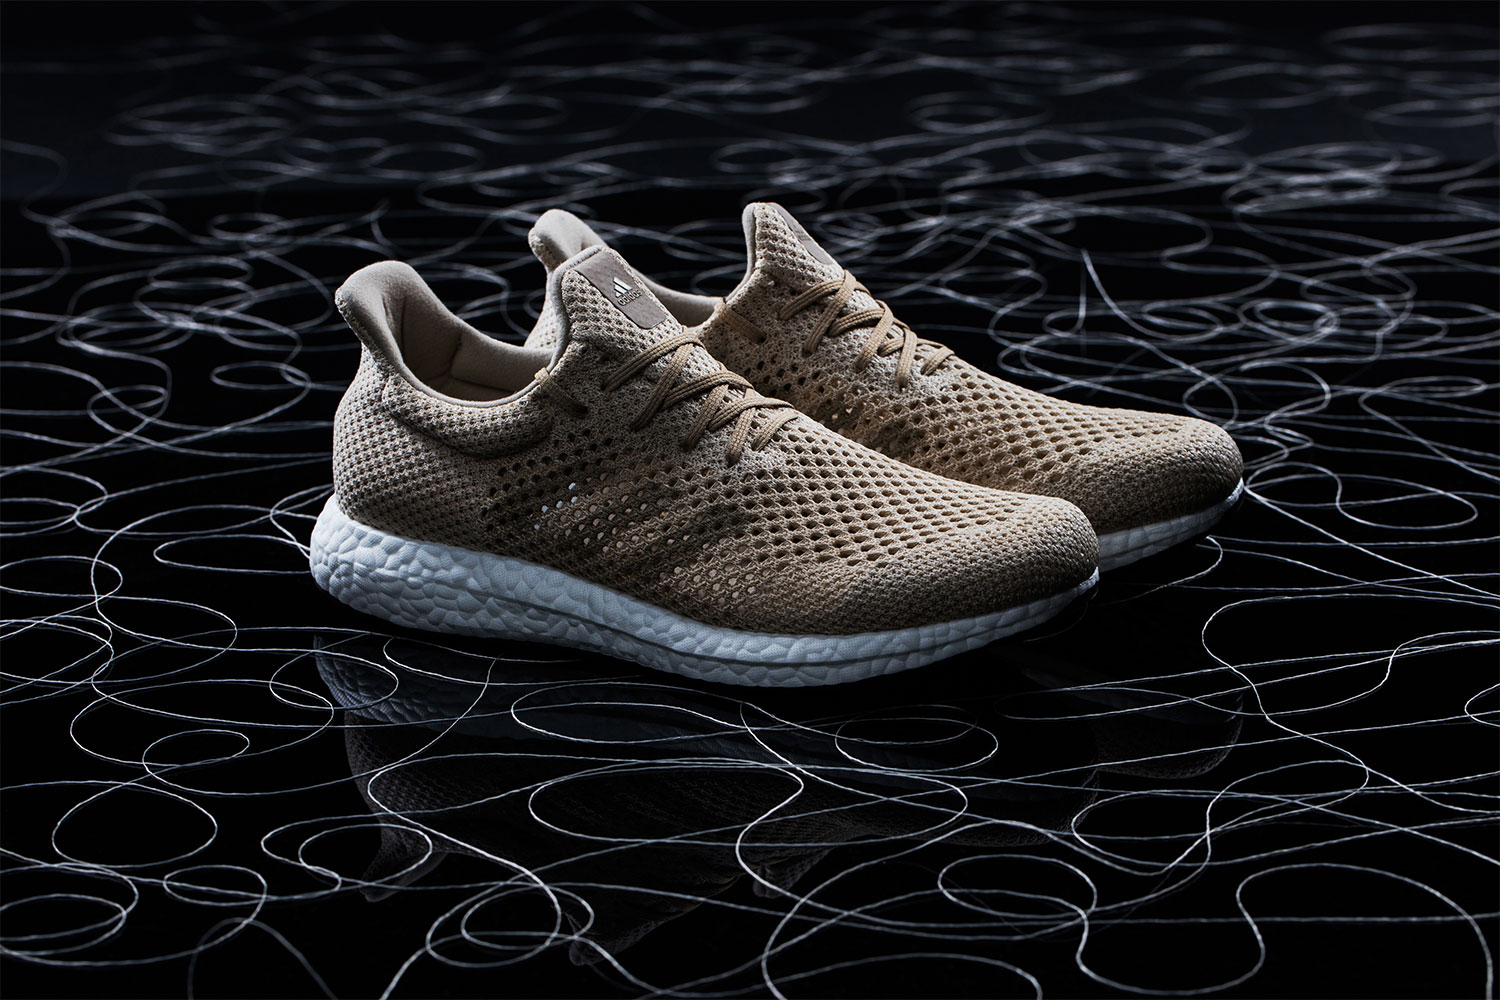 Adidas Develops Biodegradable, Synthetic Spider Silk Shoes | Digital Trends